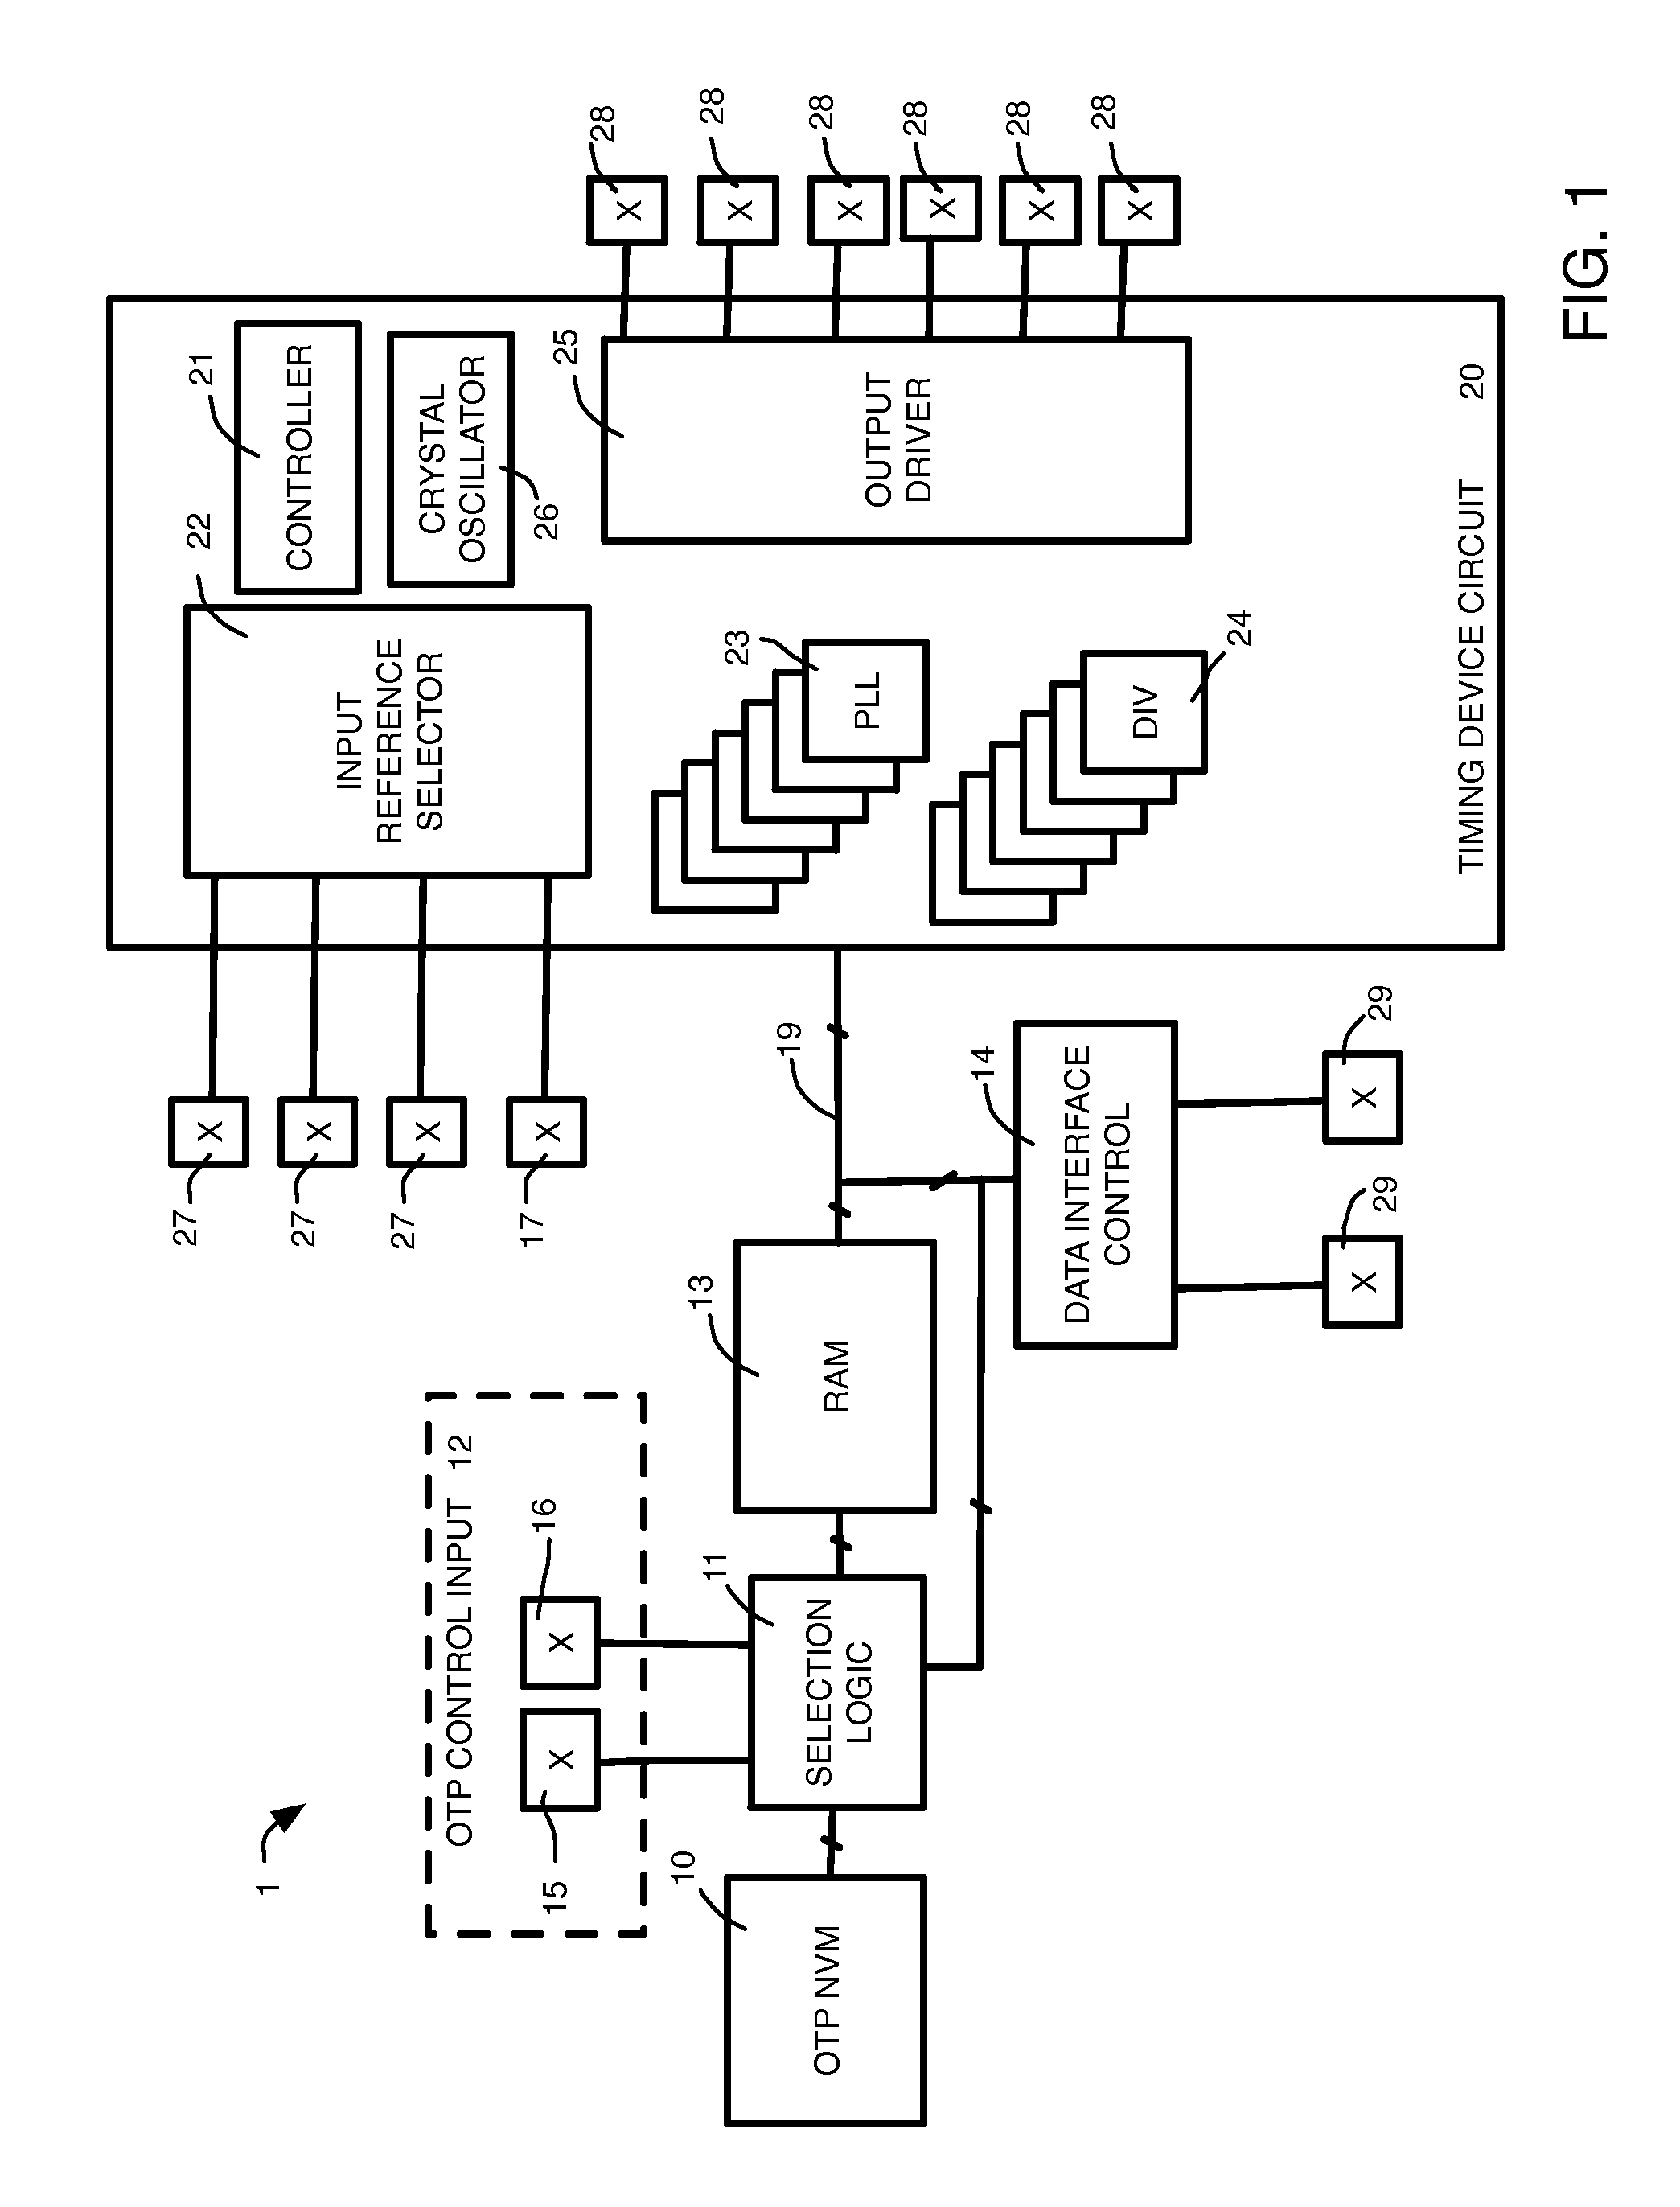 Controlling operation of a timing device using an OTP NVM to store timing device configurations in a RAM